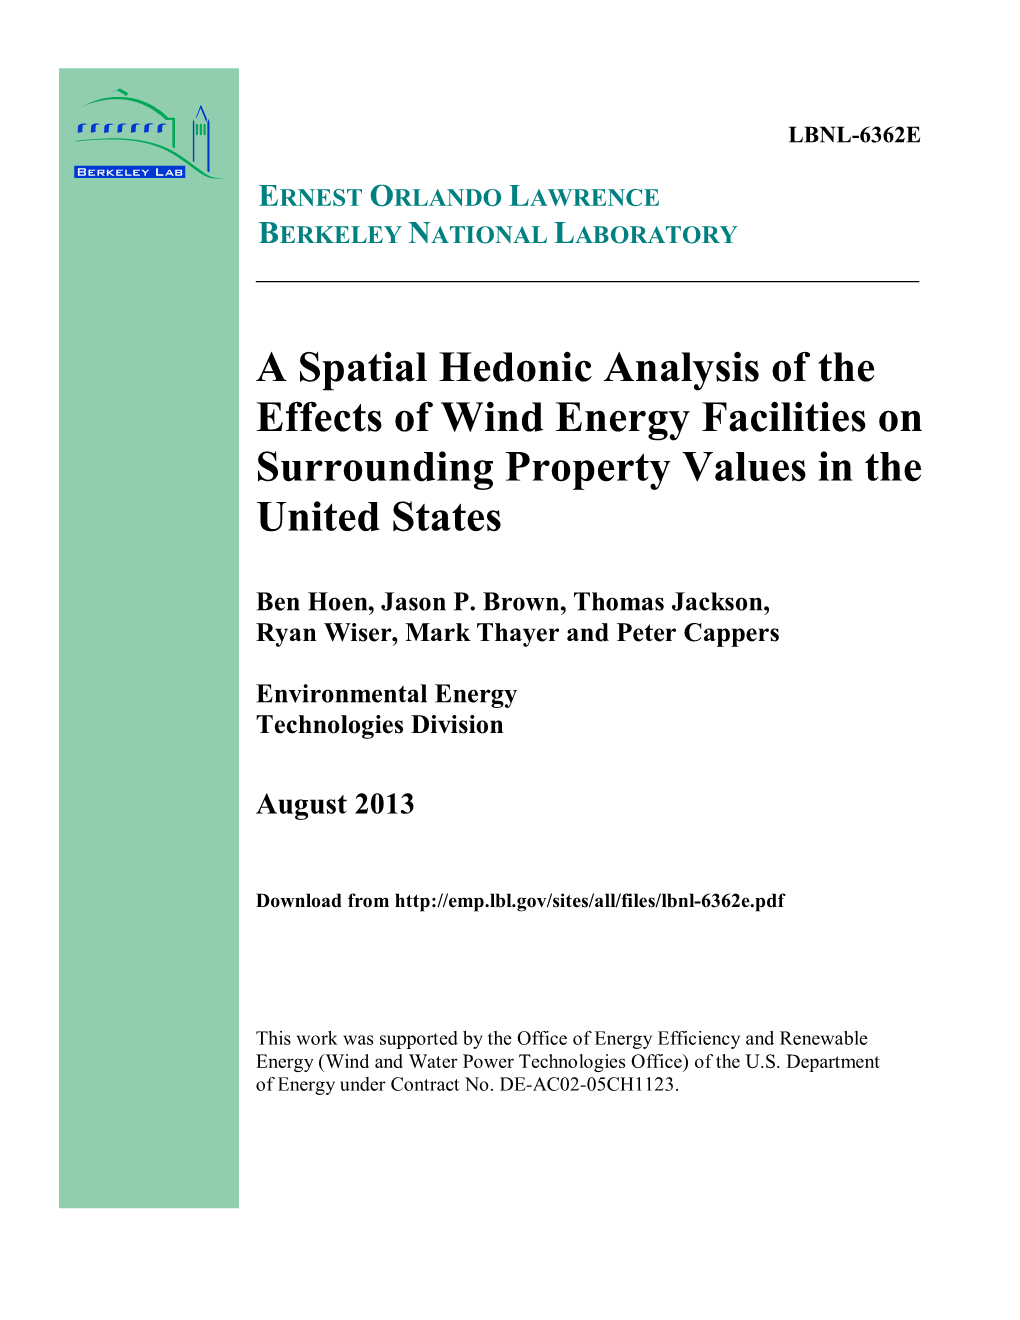 A Spatial Hedonic Analysis of the Effects of Wind Energy Facilities on Surrounding Property Values in the United States